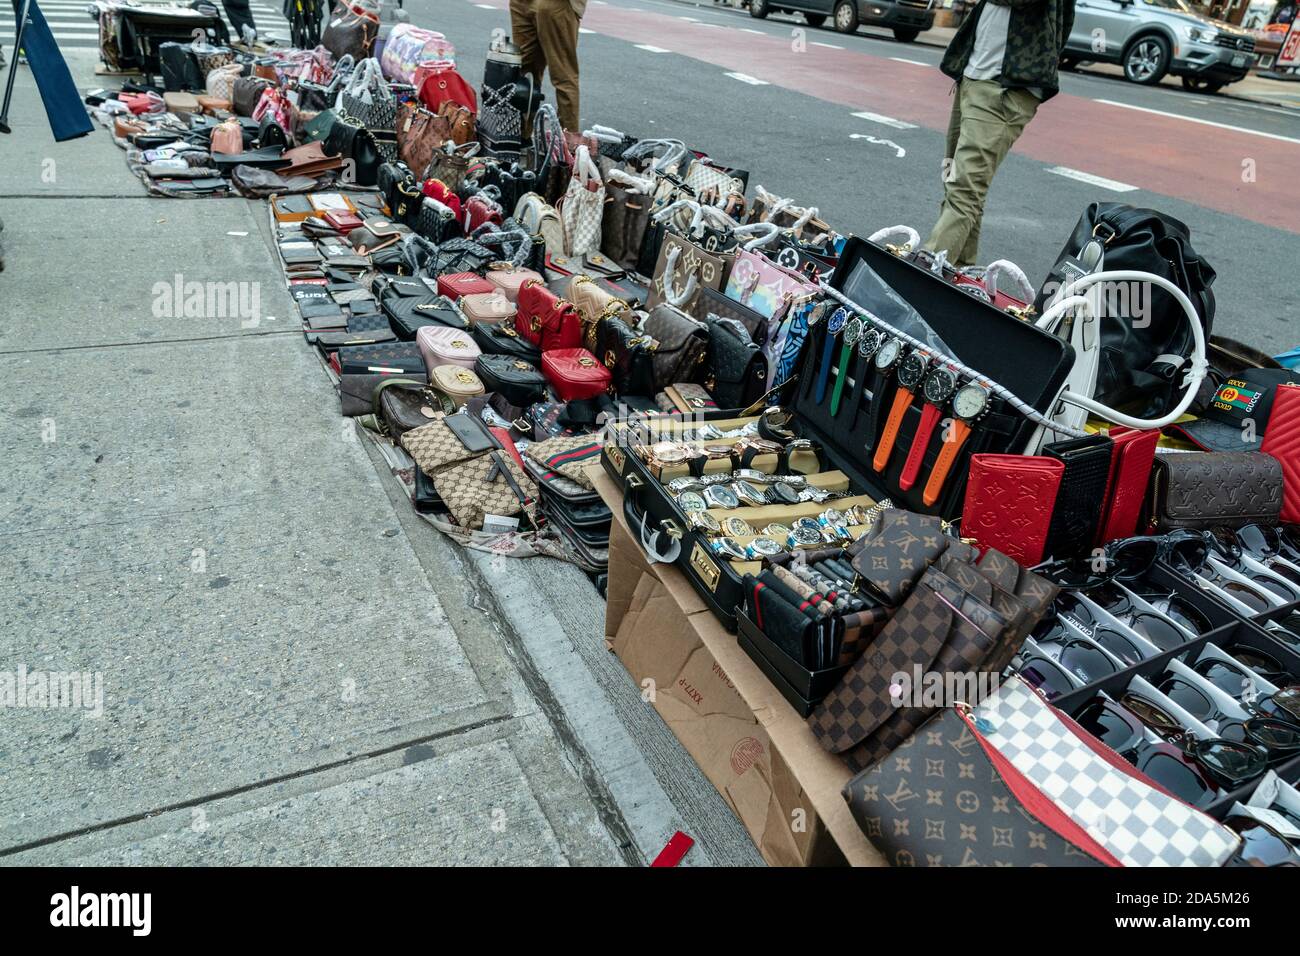 New York, NY - November 9, 2020: Street vendors sell counterfeits goods  like bags, sunglasses, belts and watches on Canal street and Broadway  corners Stock Photo - Alamy